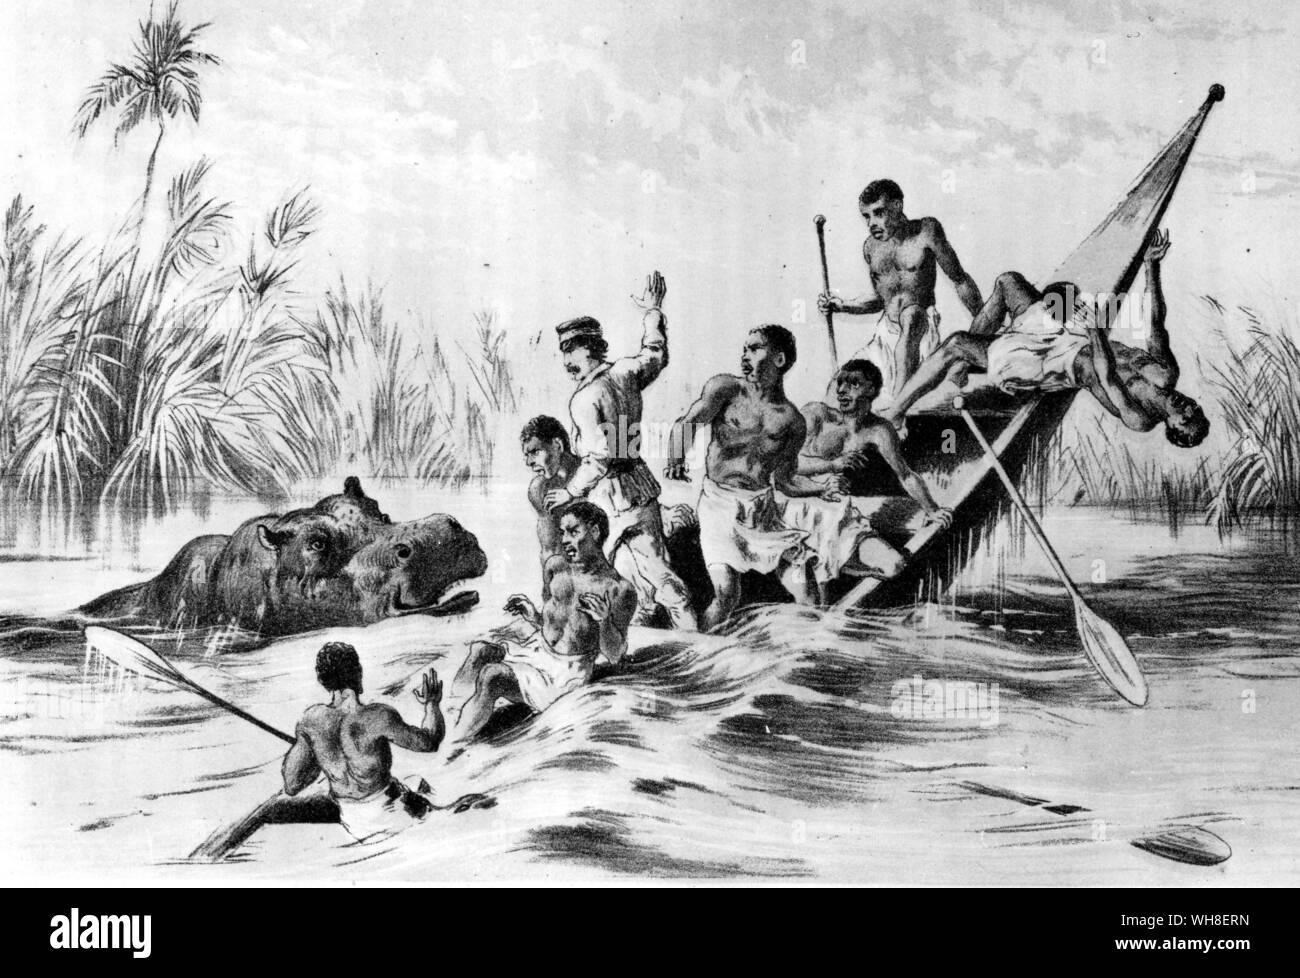 The Adventure With a Hippopotamus. David Livingstone (1813-1873), Scottish missionary and explorer, travelled extensively in Africa and discovered the Victoria Falls and the Zambezi River. The African Adventure - A History of Africa's Explorers by Timothy Severin, page 213. . . Stock Photo